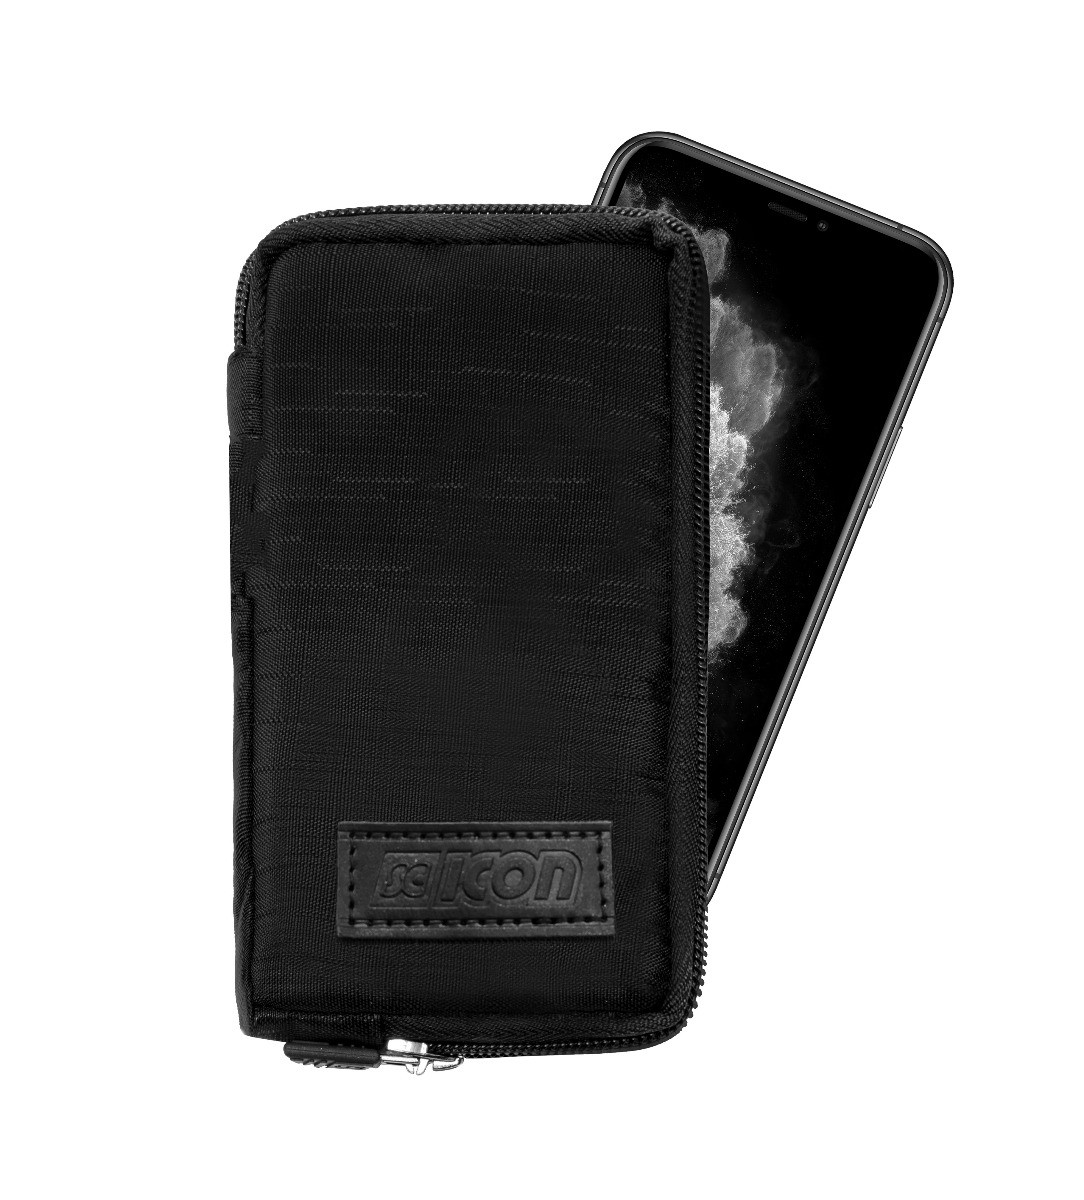 ALL CONDITIONS PHONE WALLET & POUCH